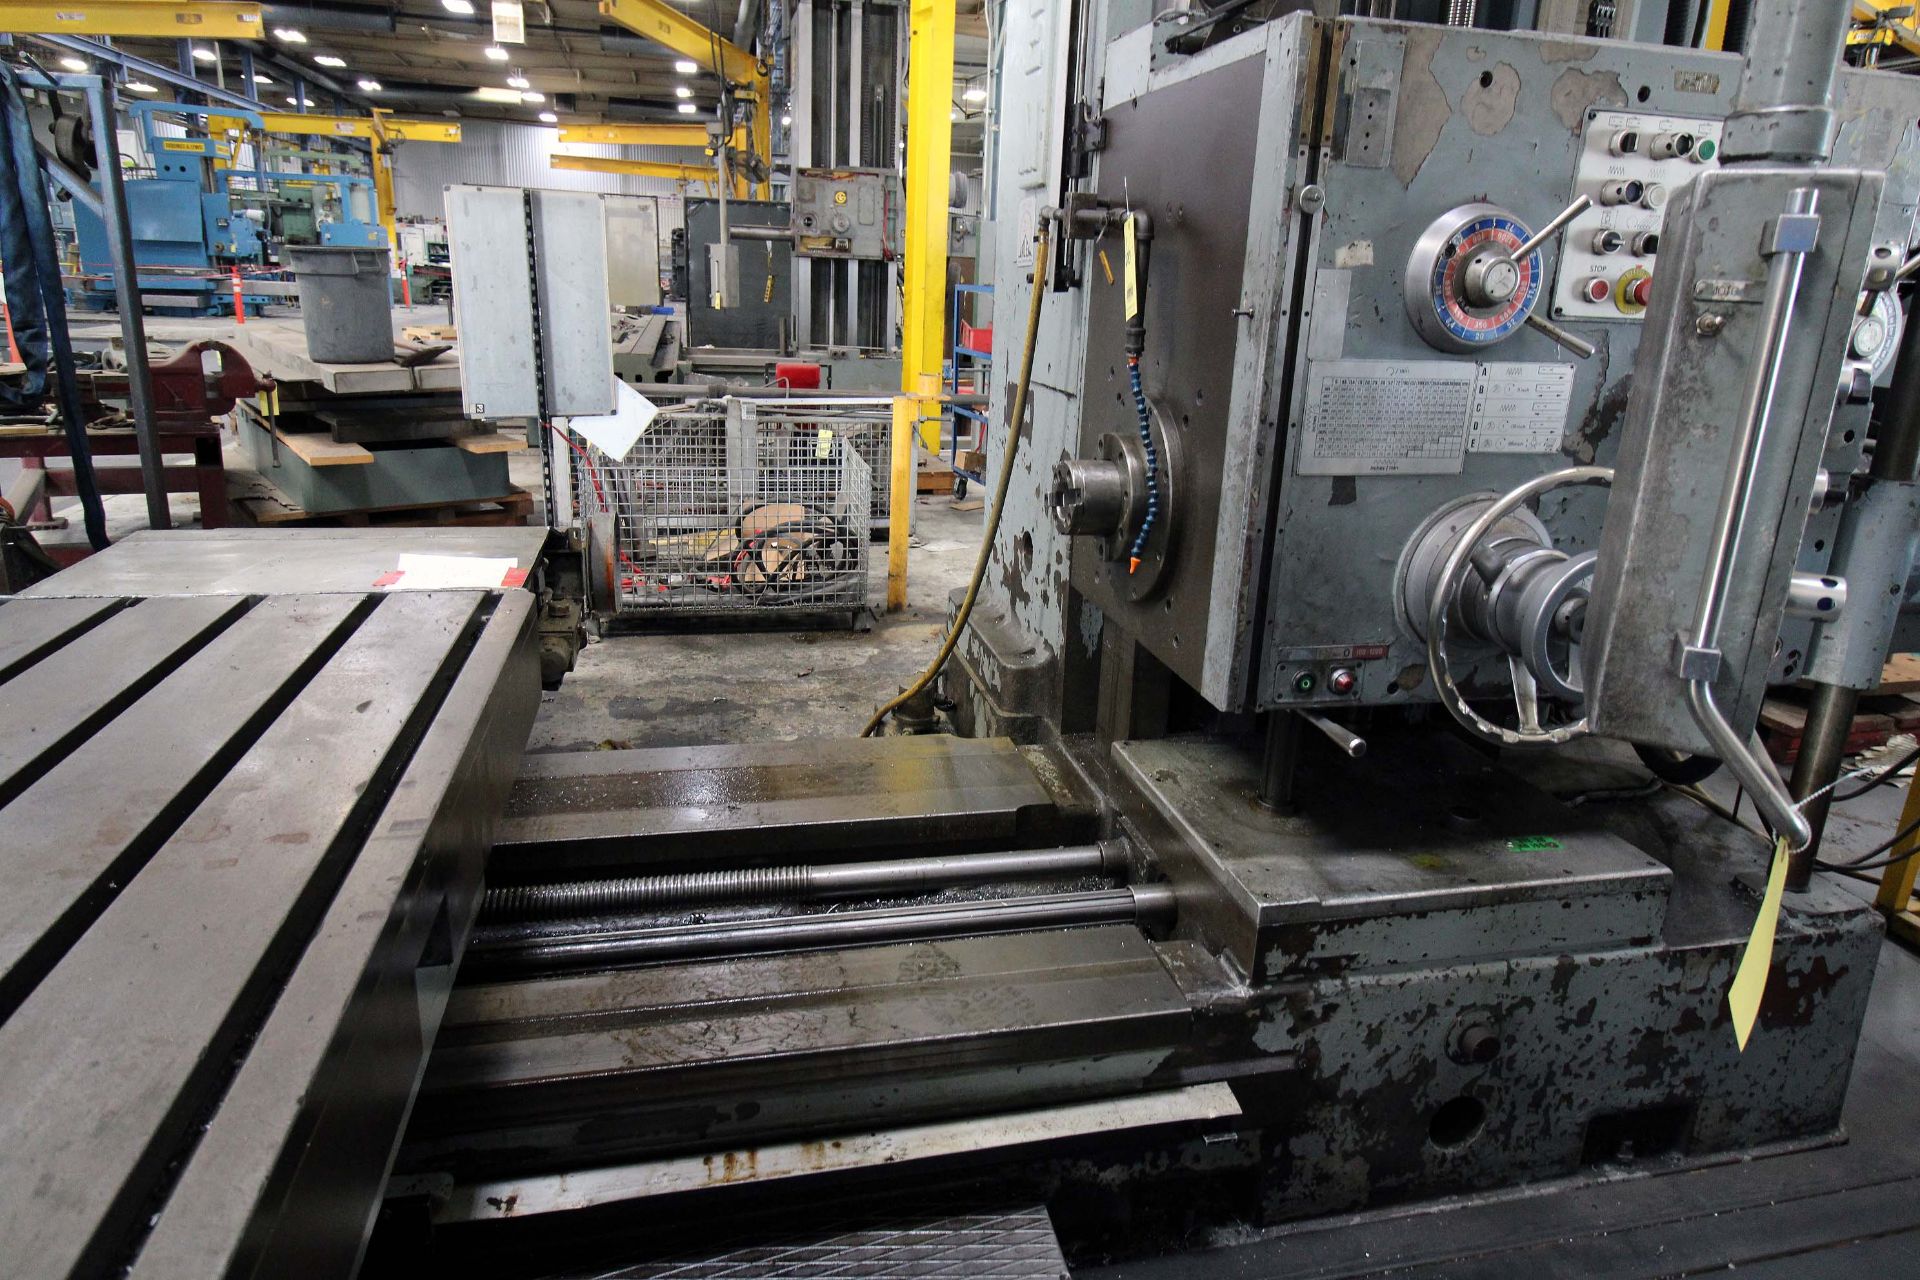 TABLE TYPE HORIZONTAL BORING MILL, SACEM HERCULES MDL. MST130, new 1980, 55” x 63-3/4” built-in - Image 7 of 10